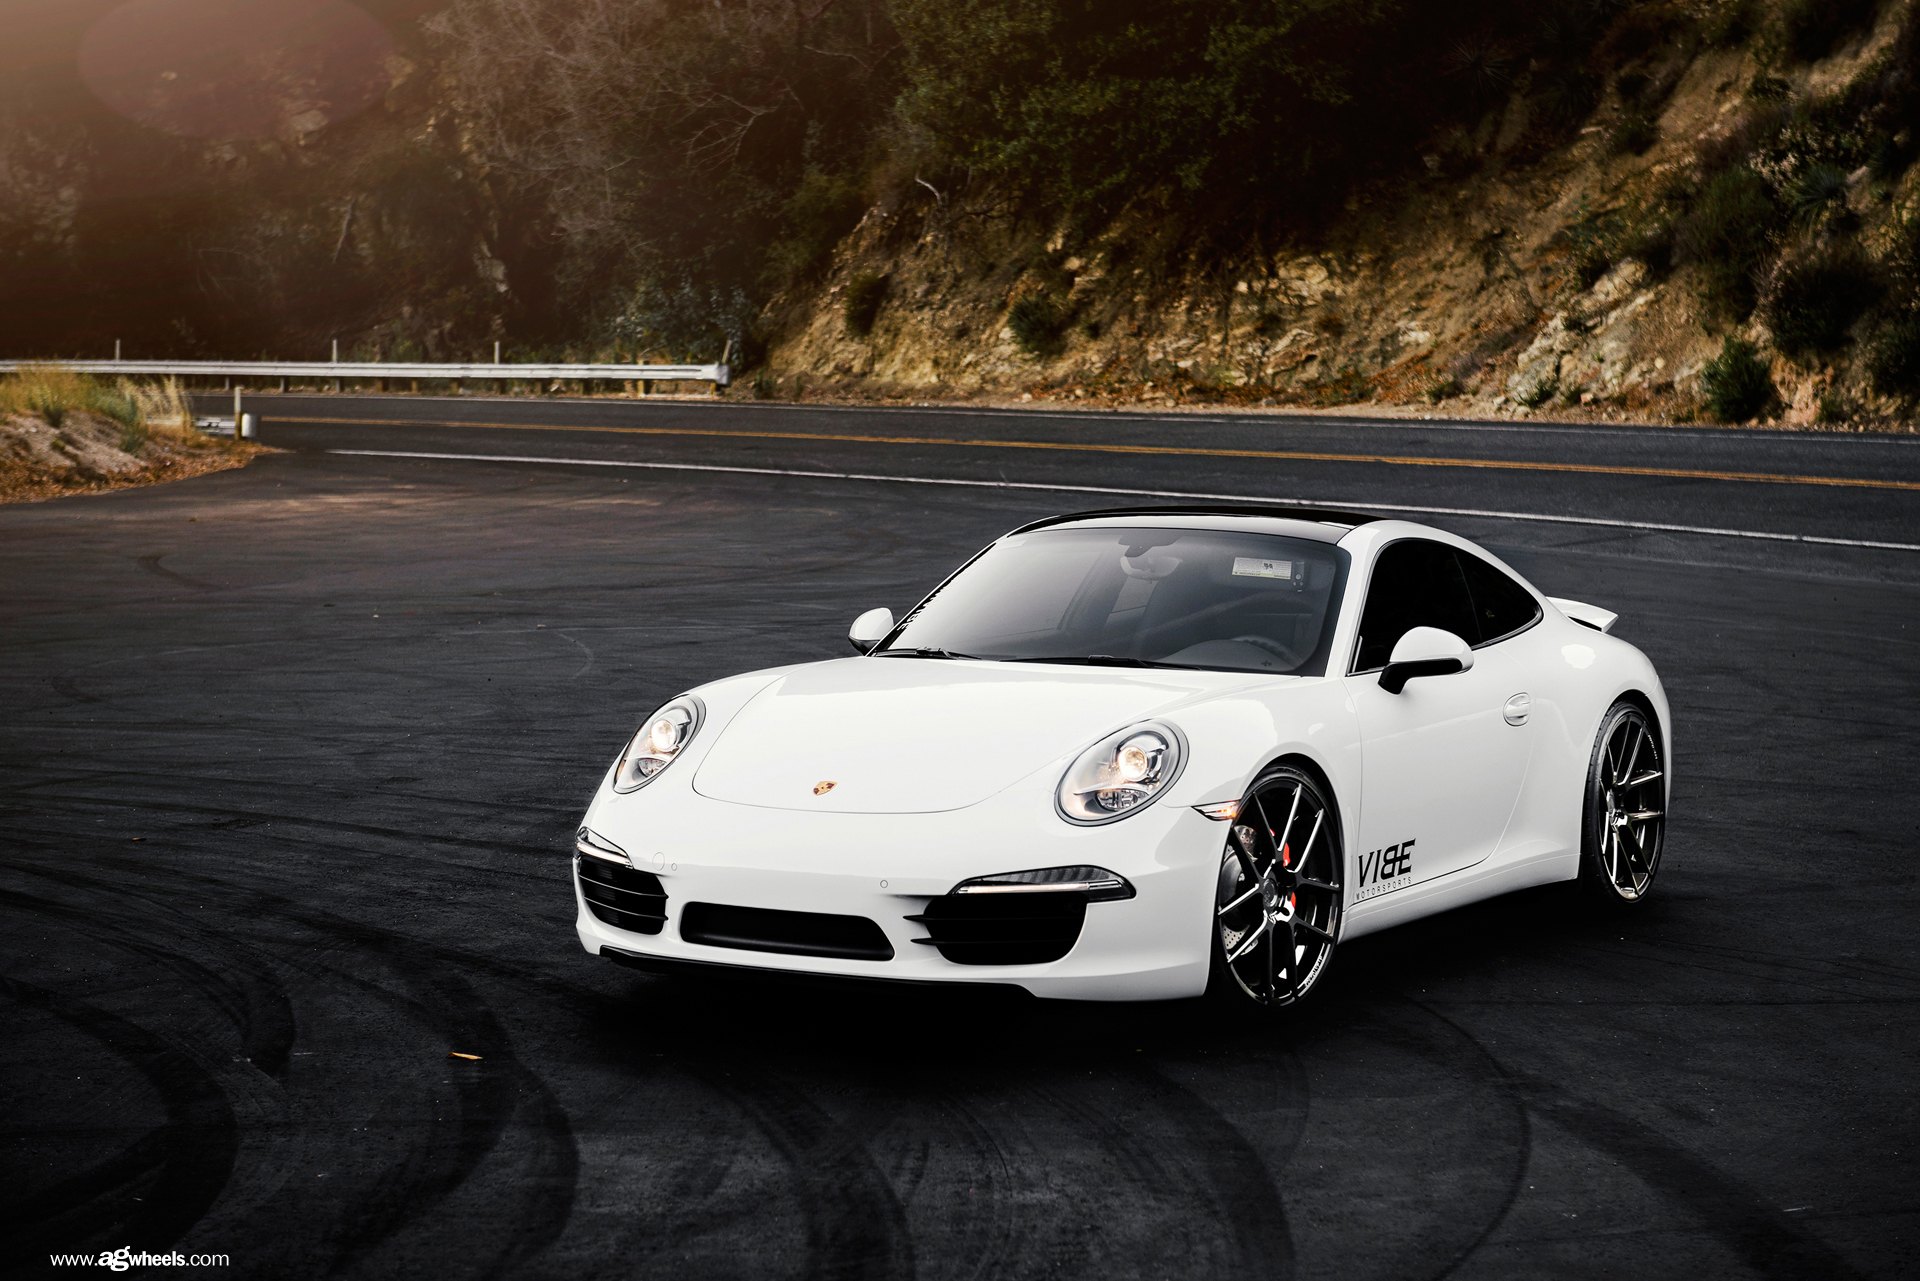 Front Bumper with LED Lights on White Porsche 911 - Photo by Avant Garde Wheels